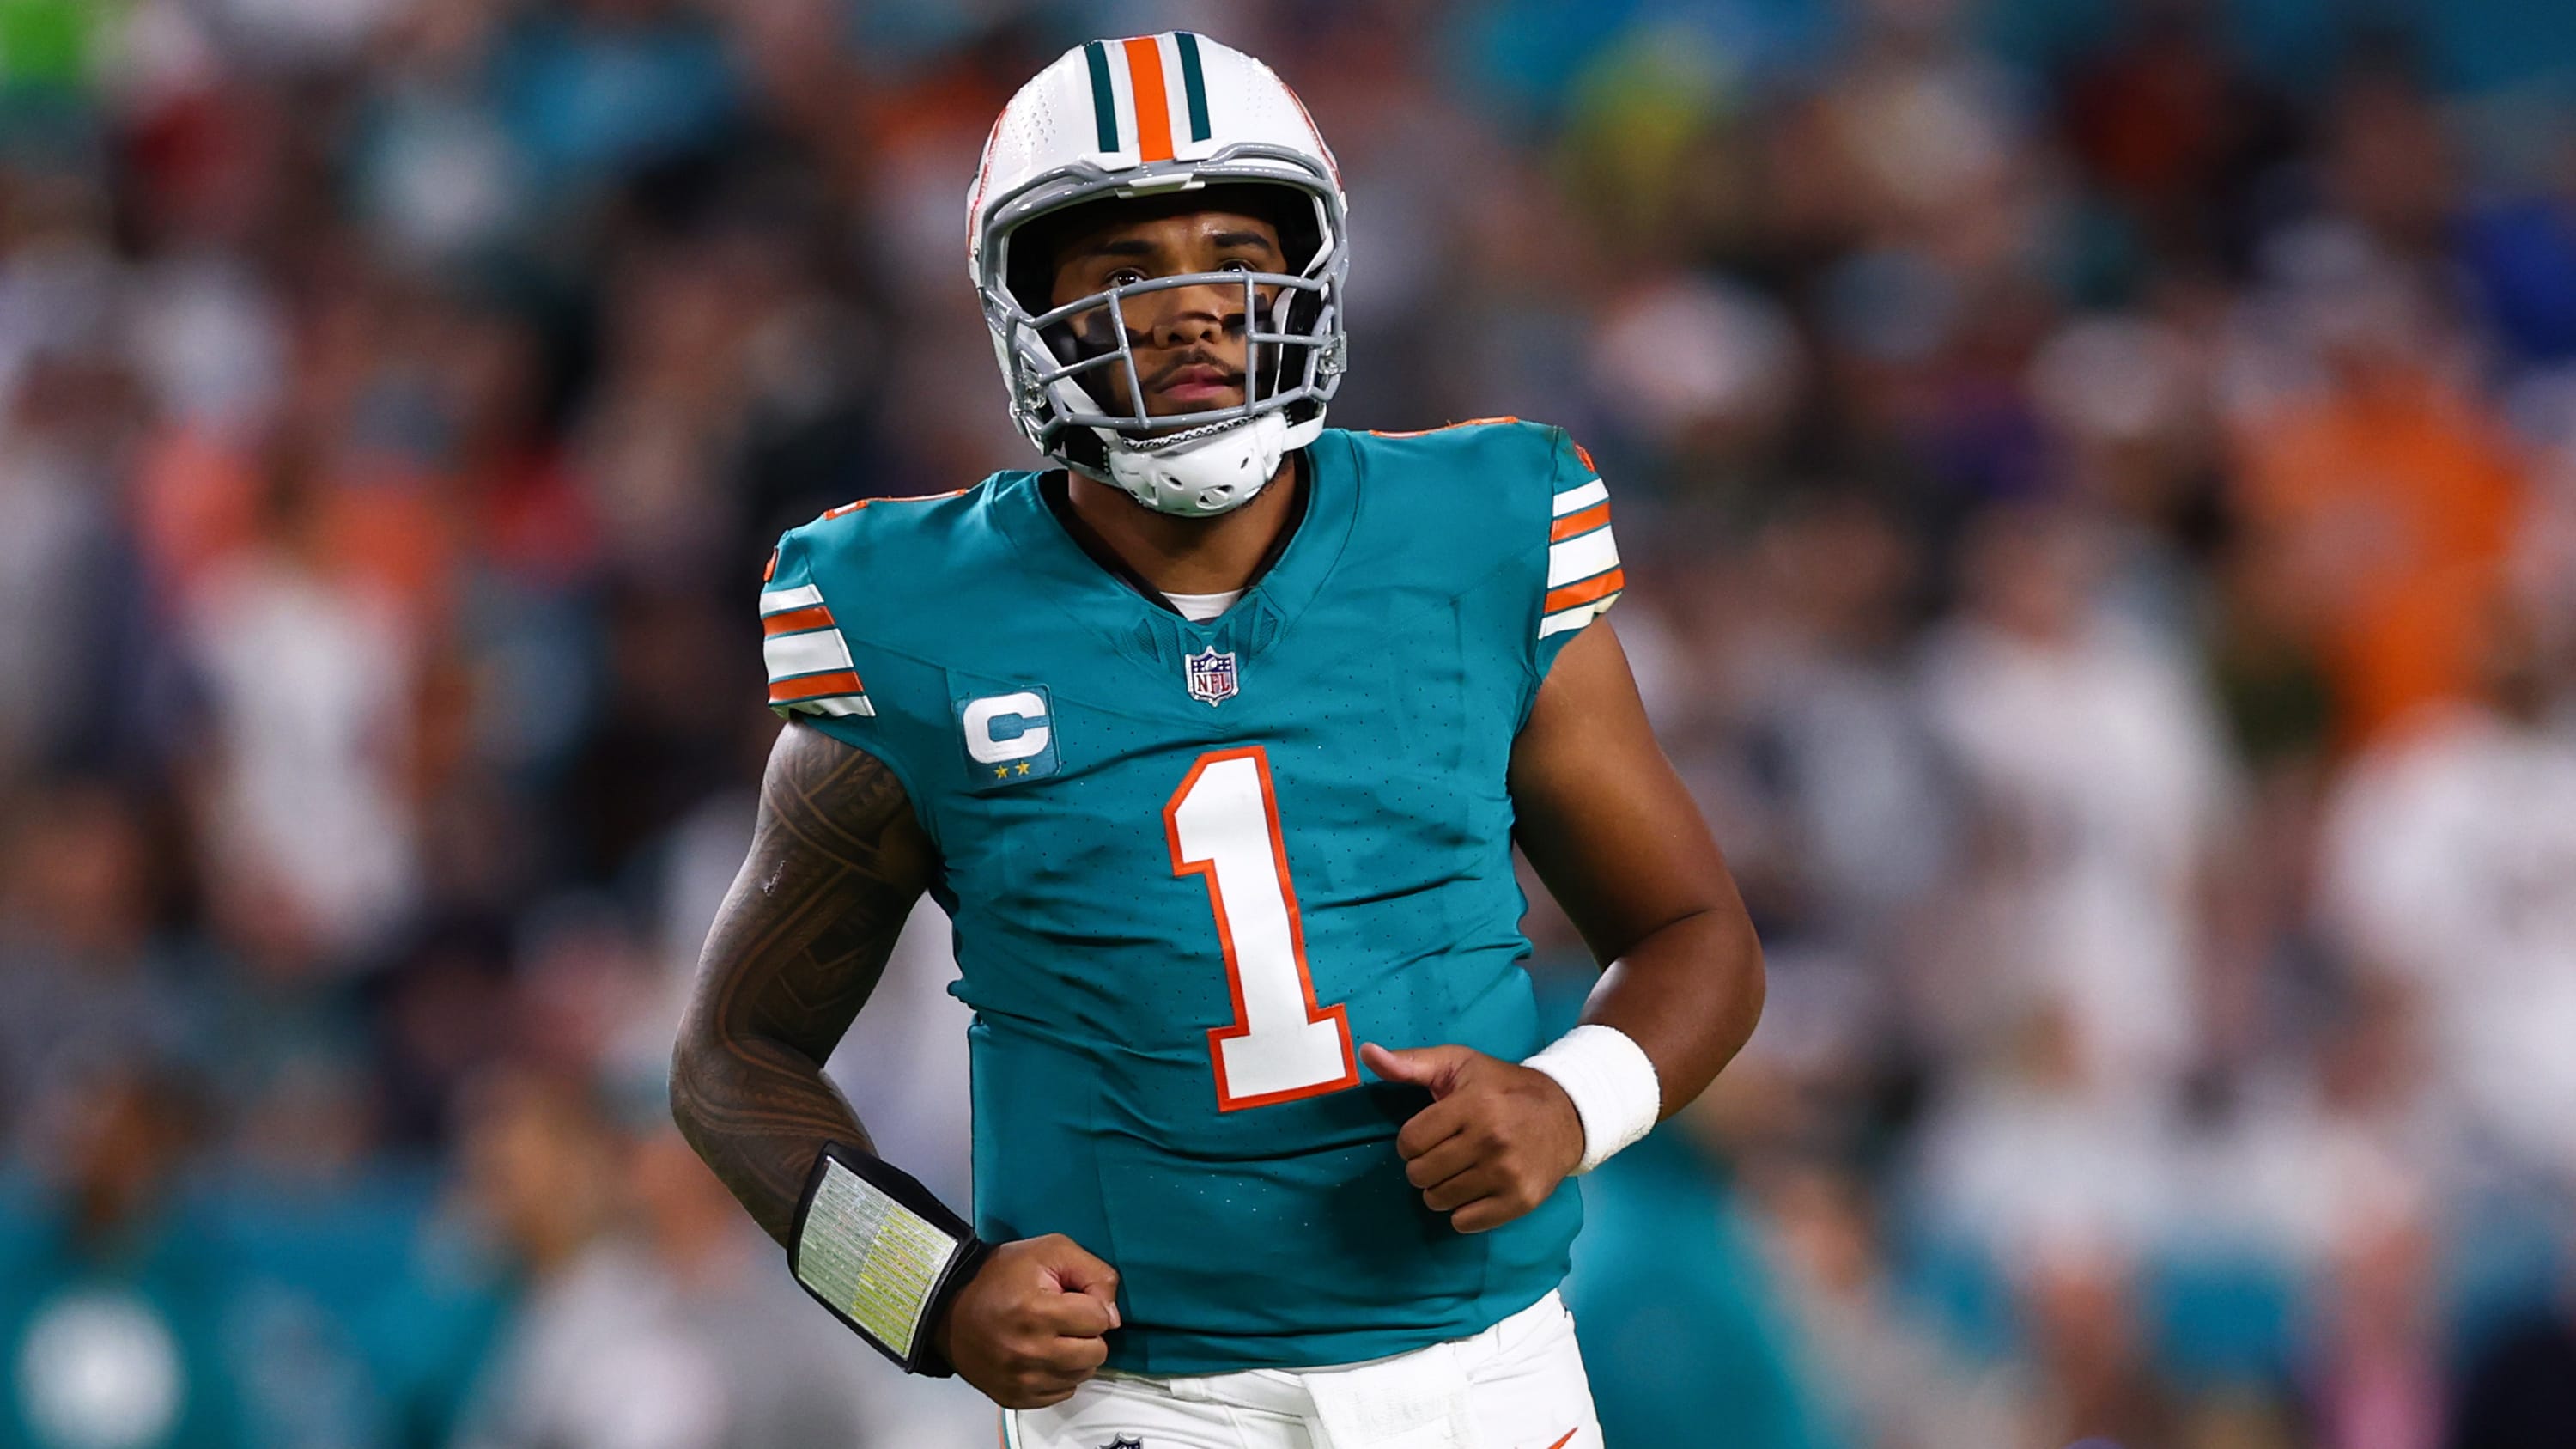 The Miami Dolphins quarterback is heading into his fifth NFL season.